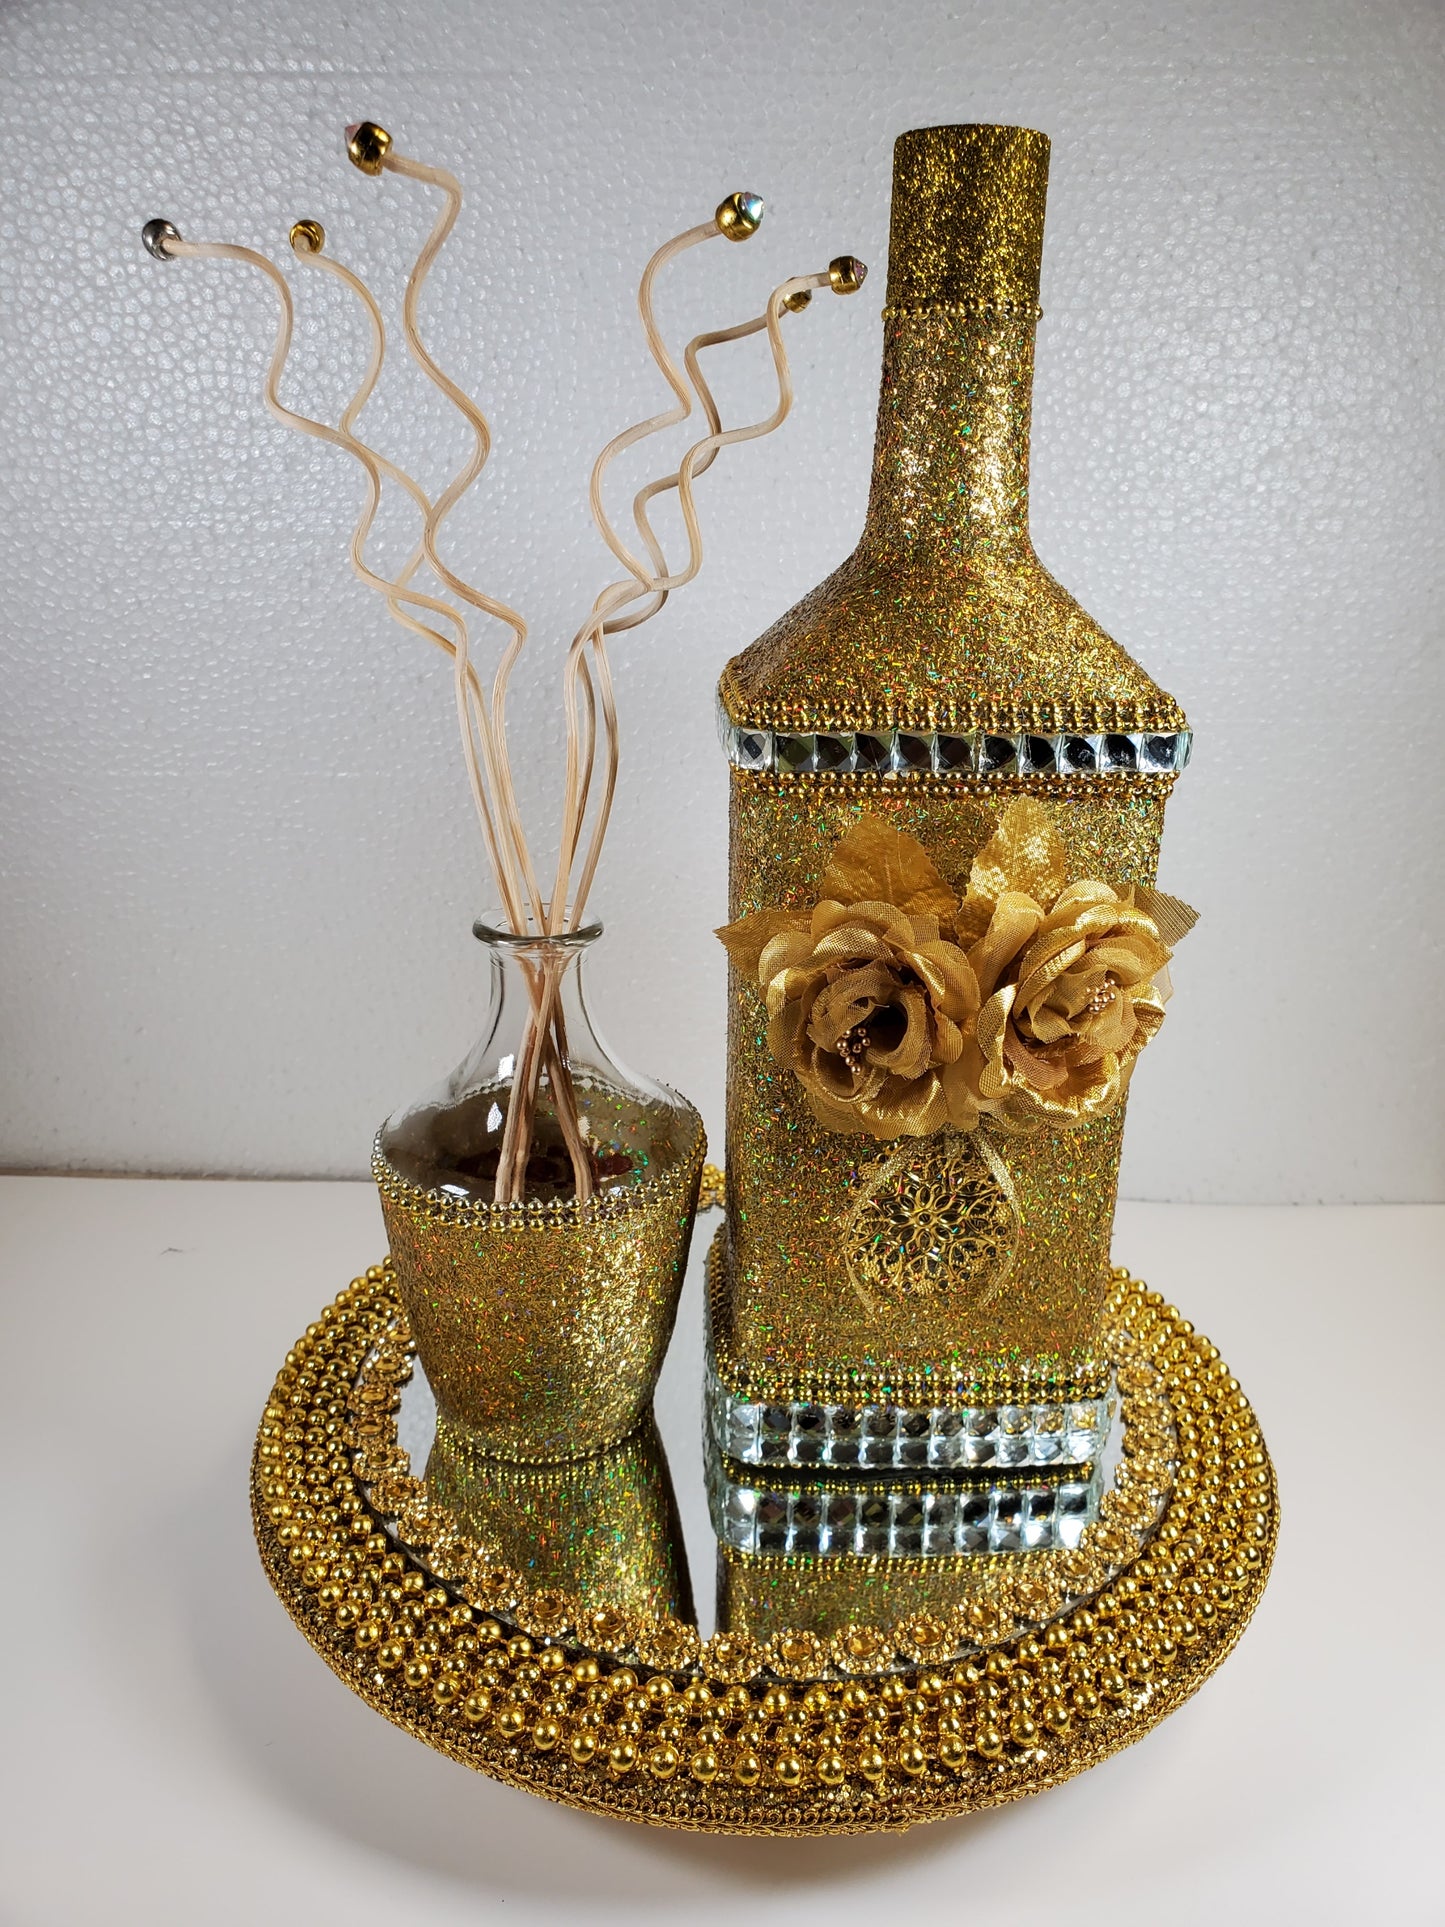 Dazzling Recycled Wine Bottles.